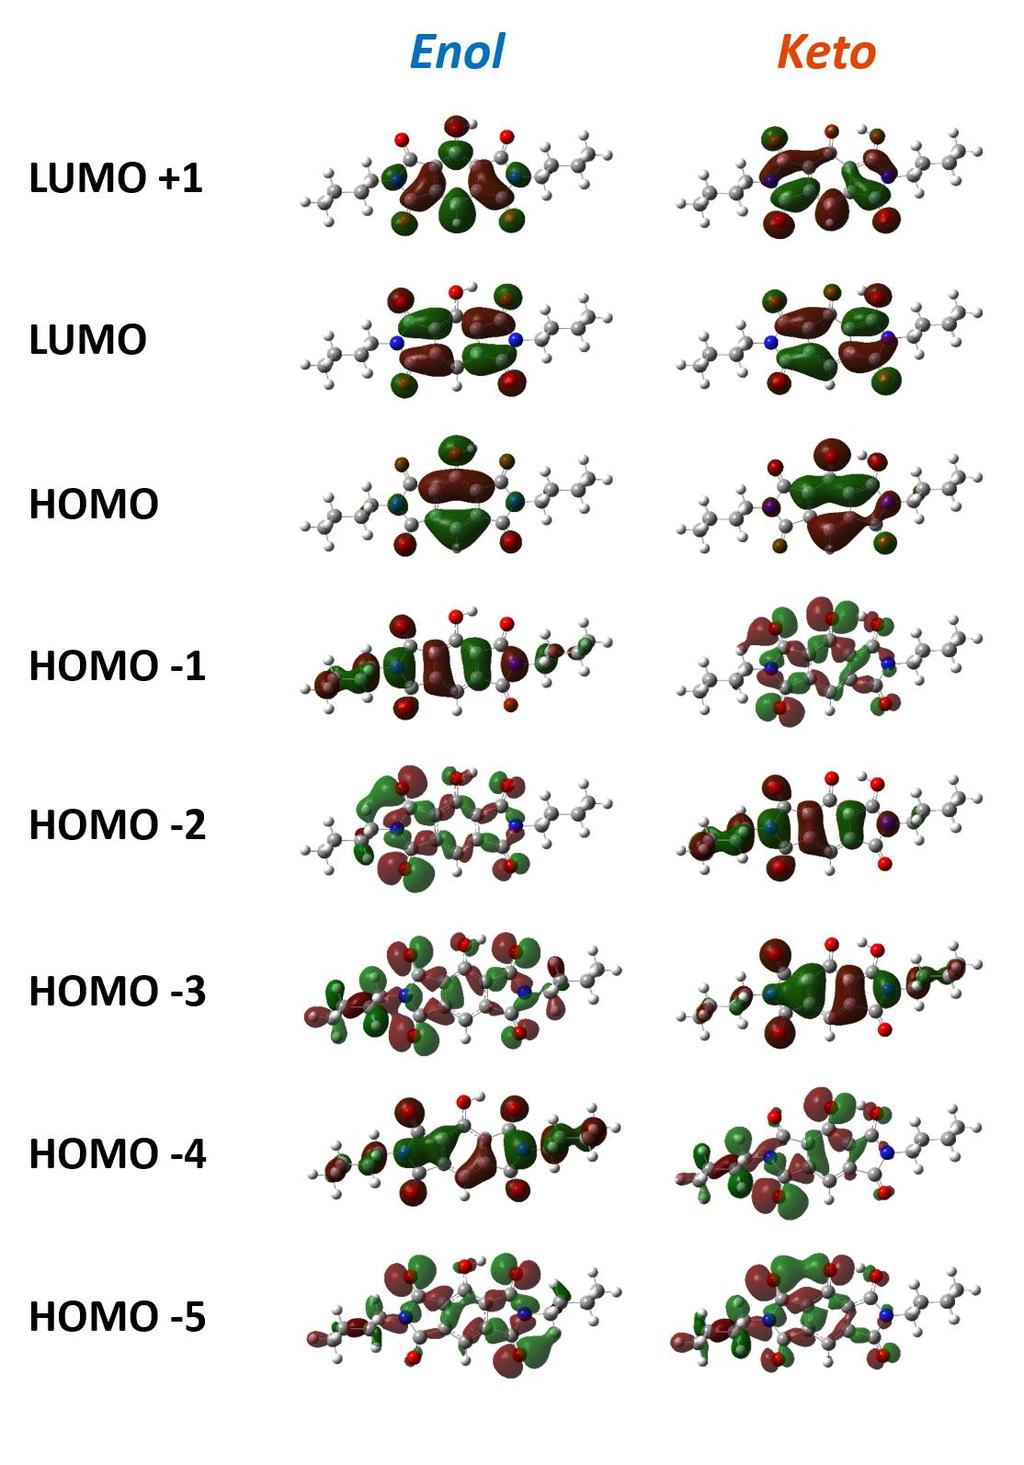 Figure S2. Calculated molecular orbitals of 3H-MC enol and keto forms (TD-DFT method at B97X- D/6-311++G(d,p) level).